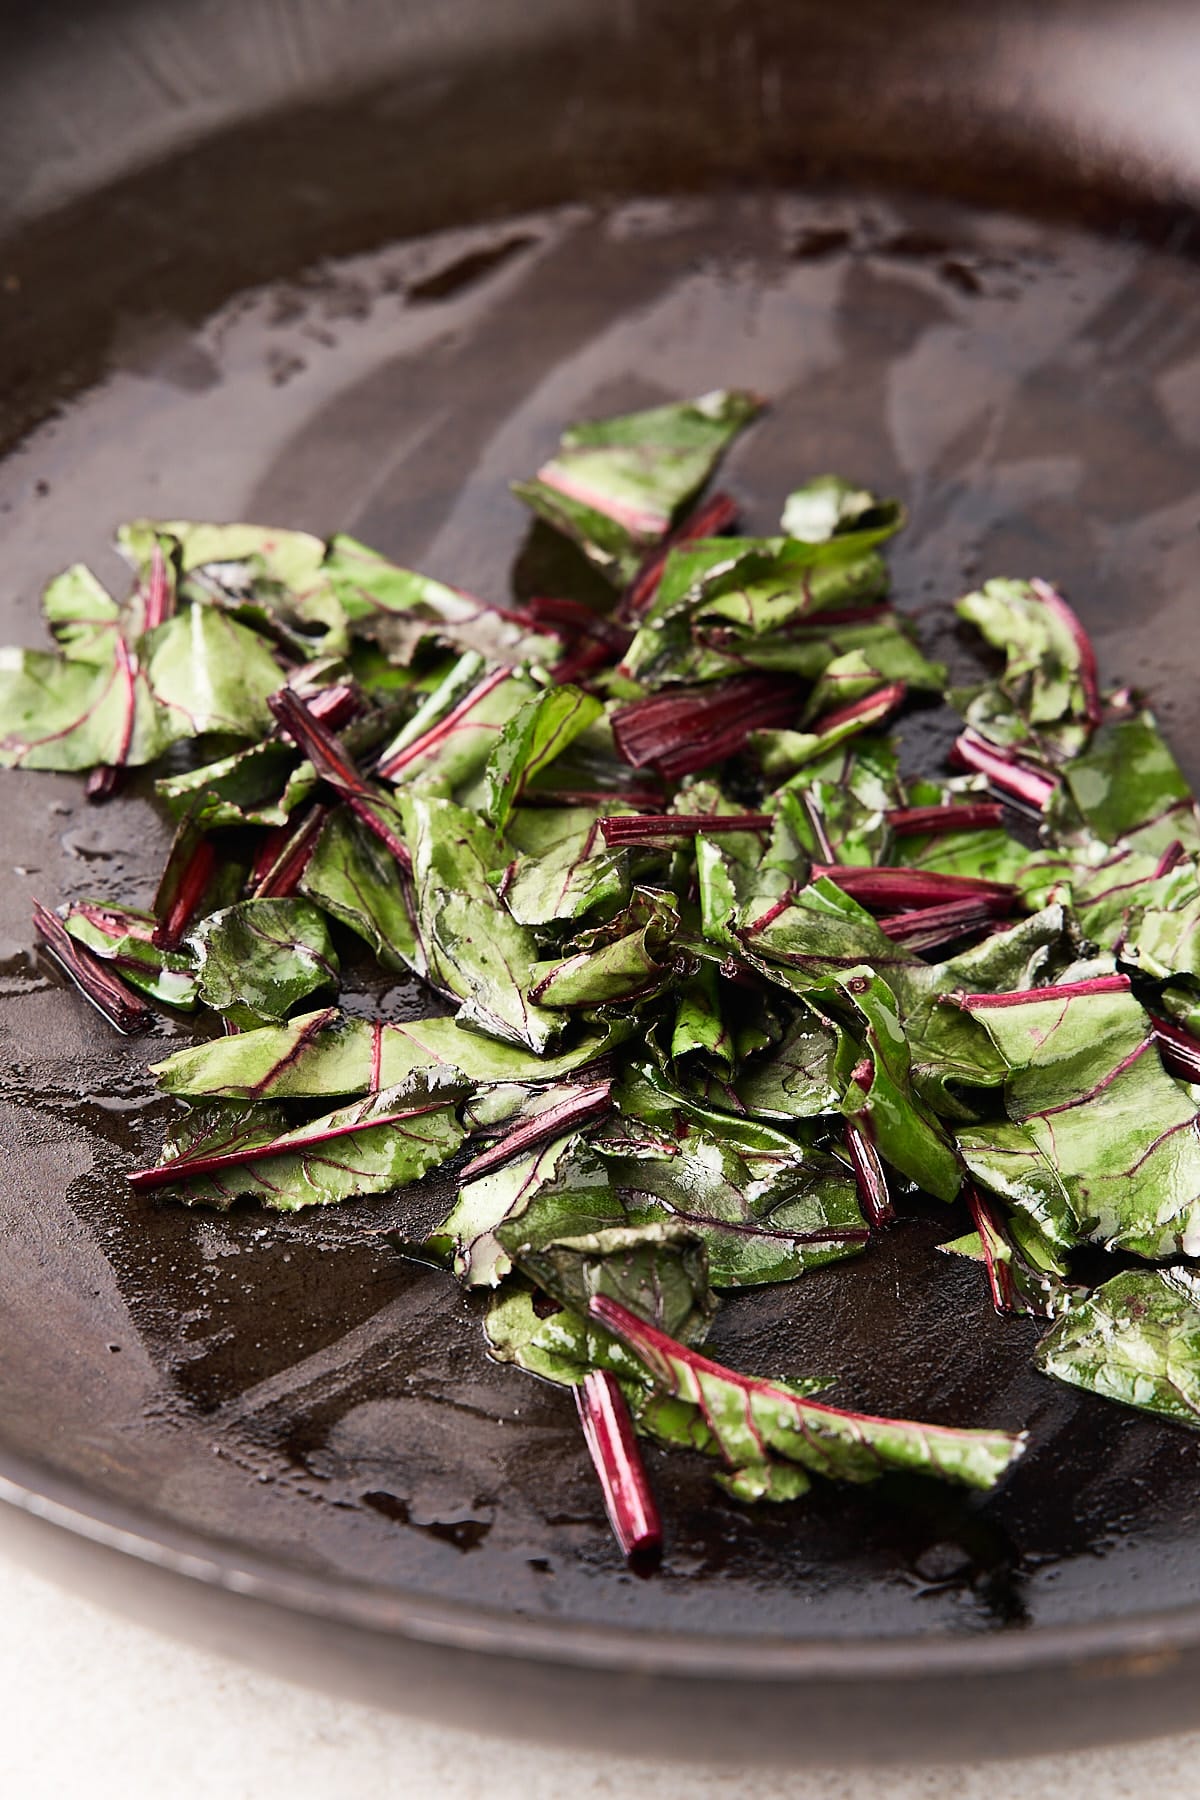 Beet greens in a skillet.